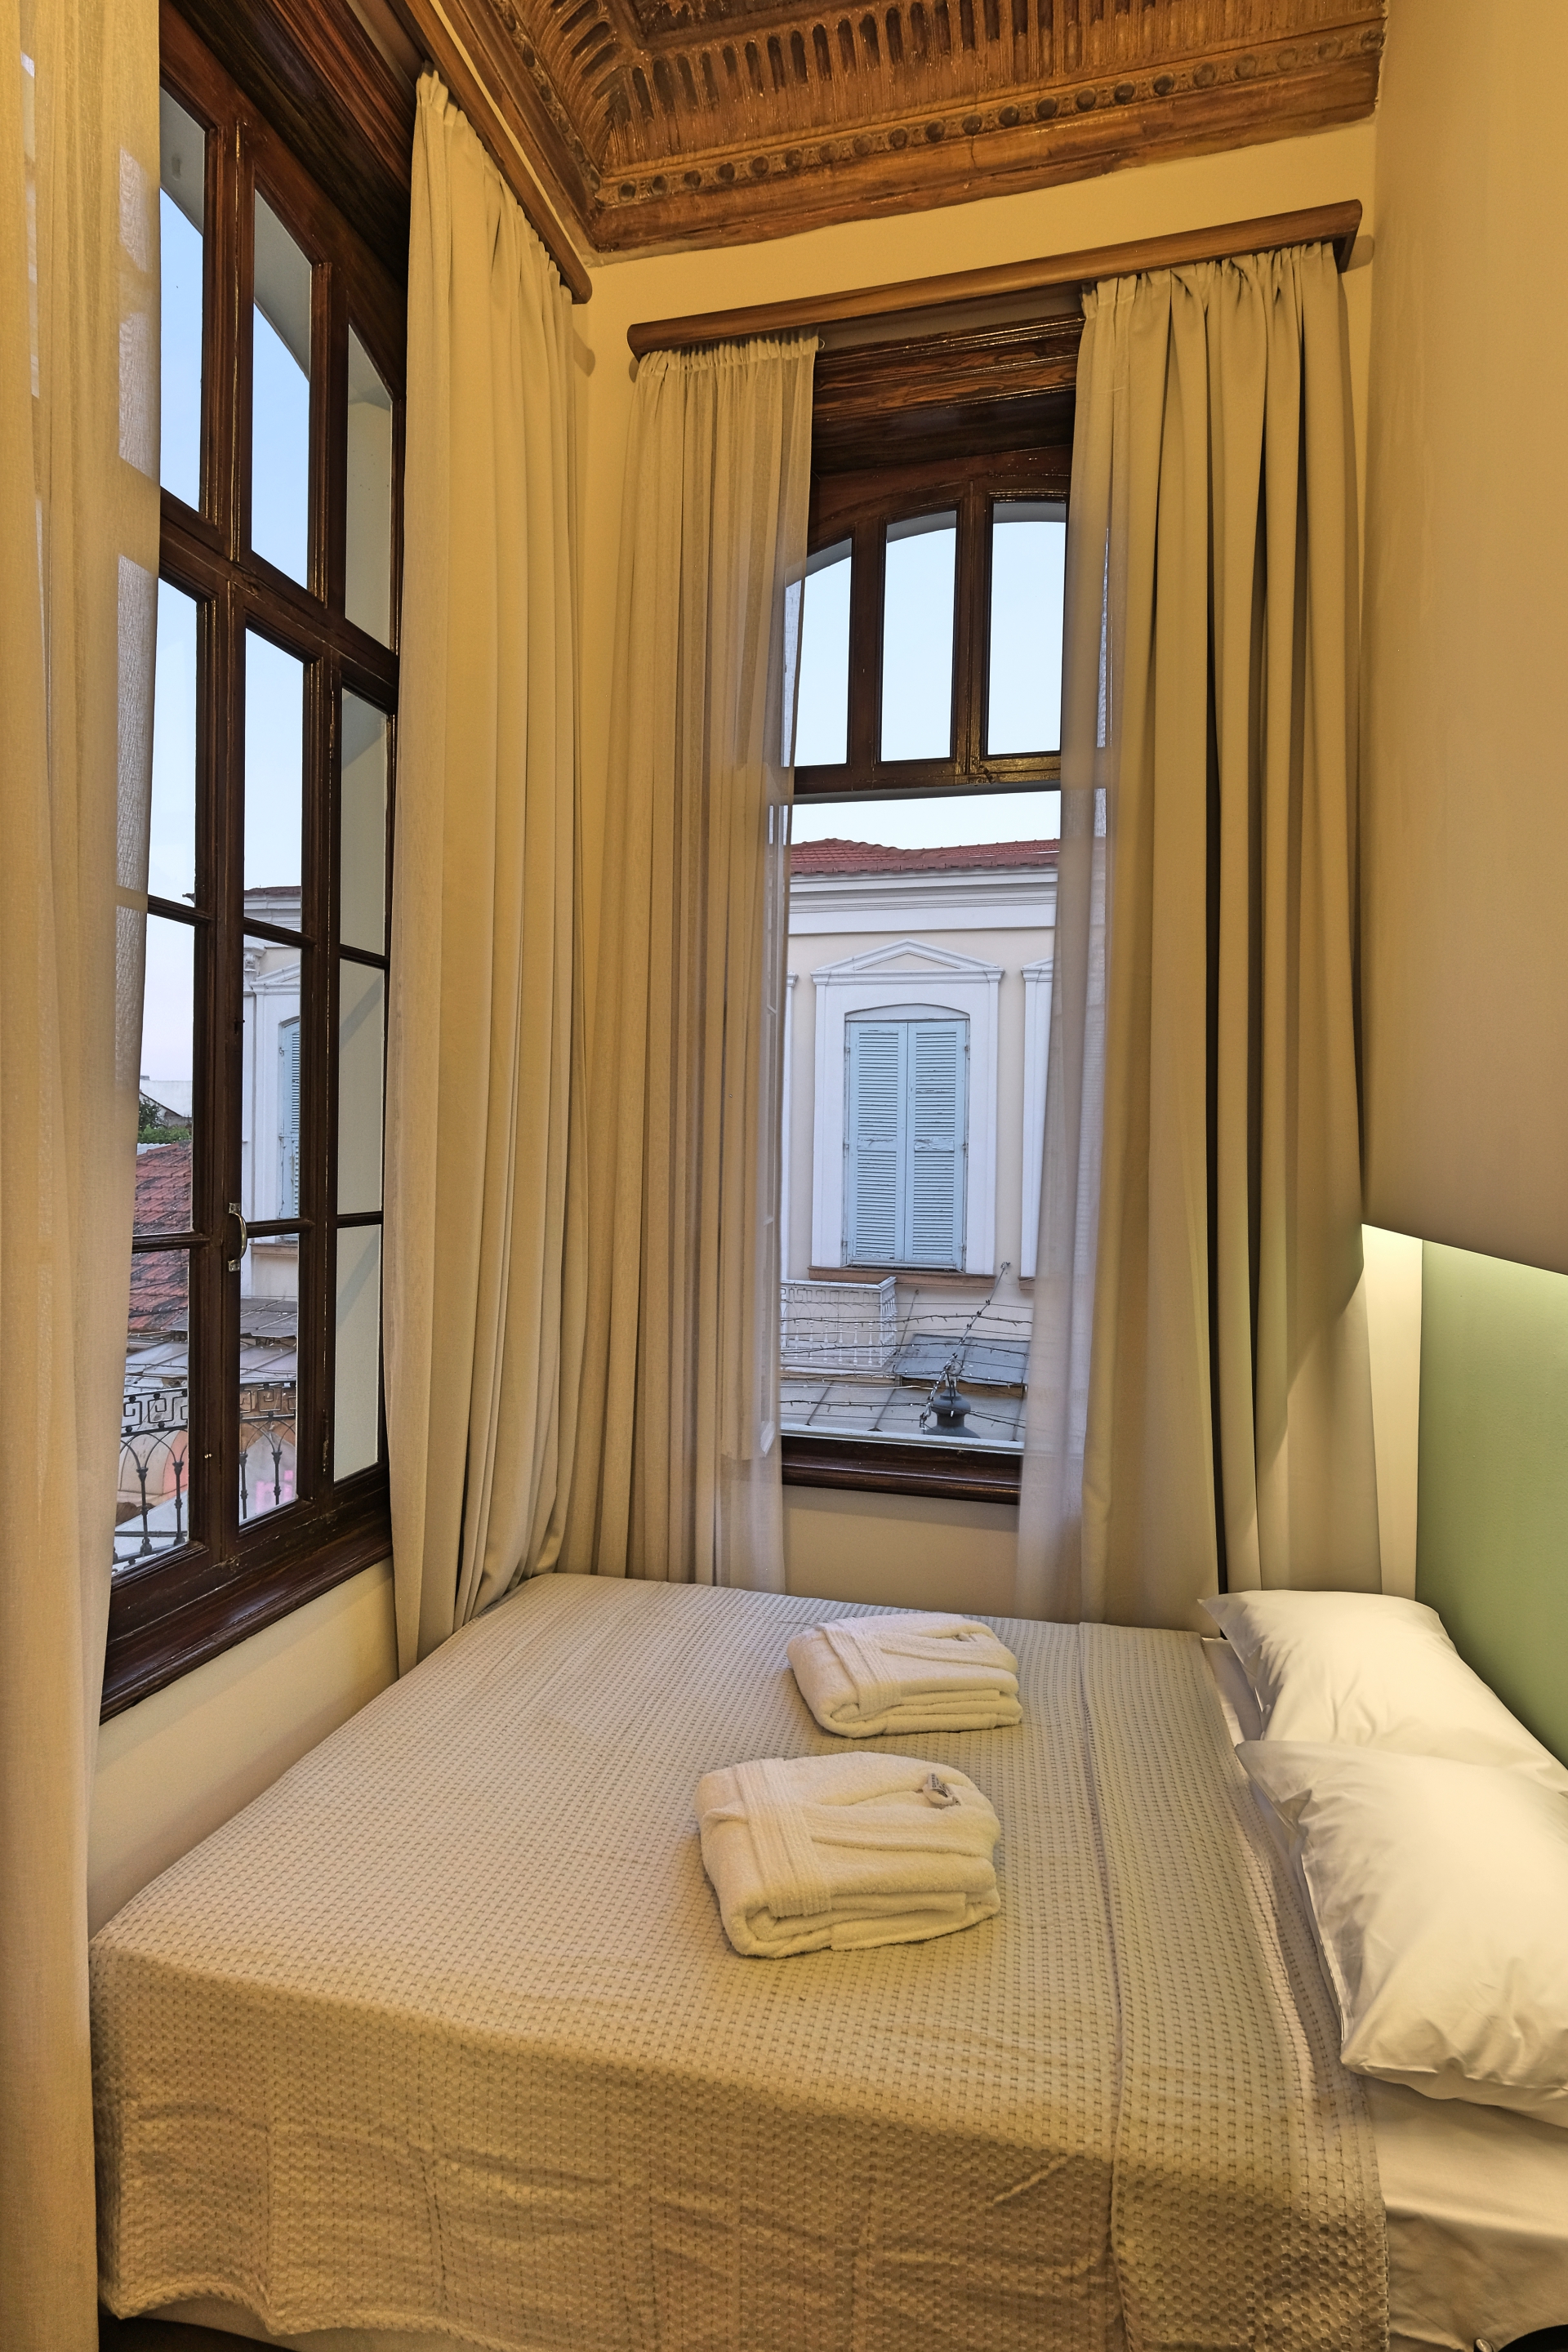 Budget Single Room Bed & Windows - Agora Residence - Hotel in Chios